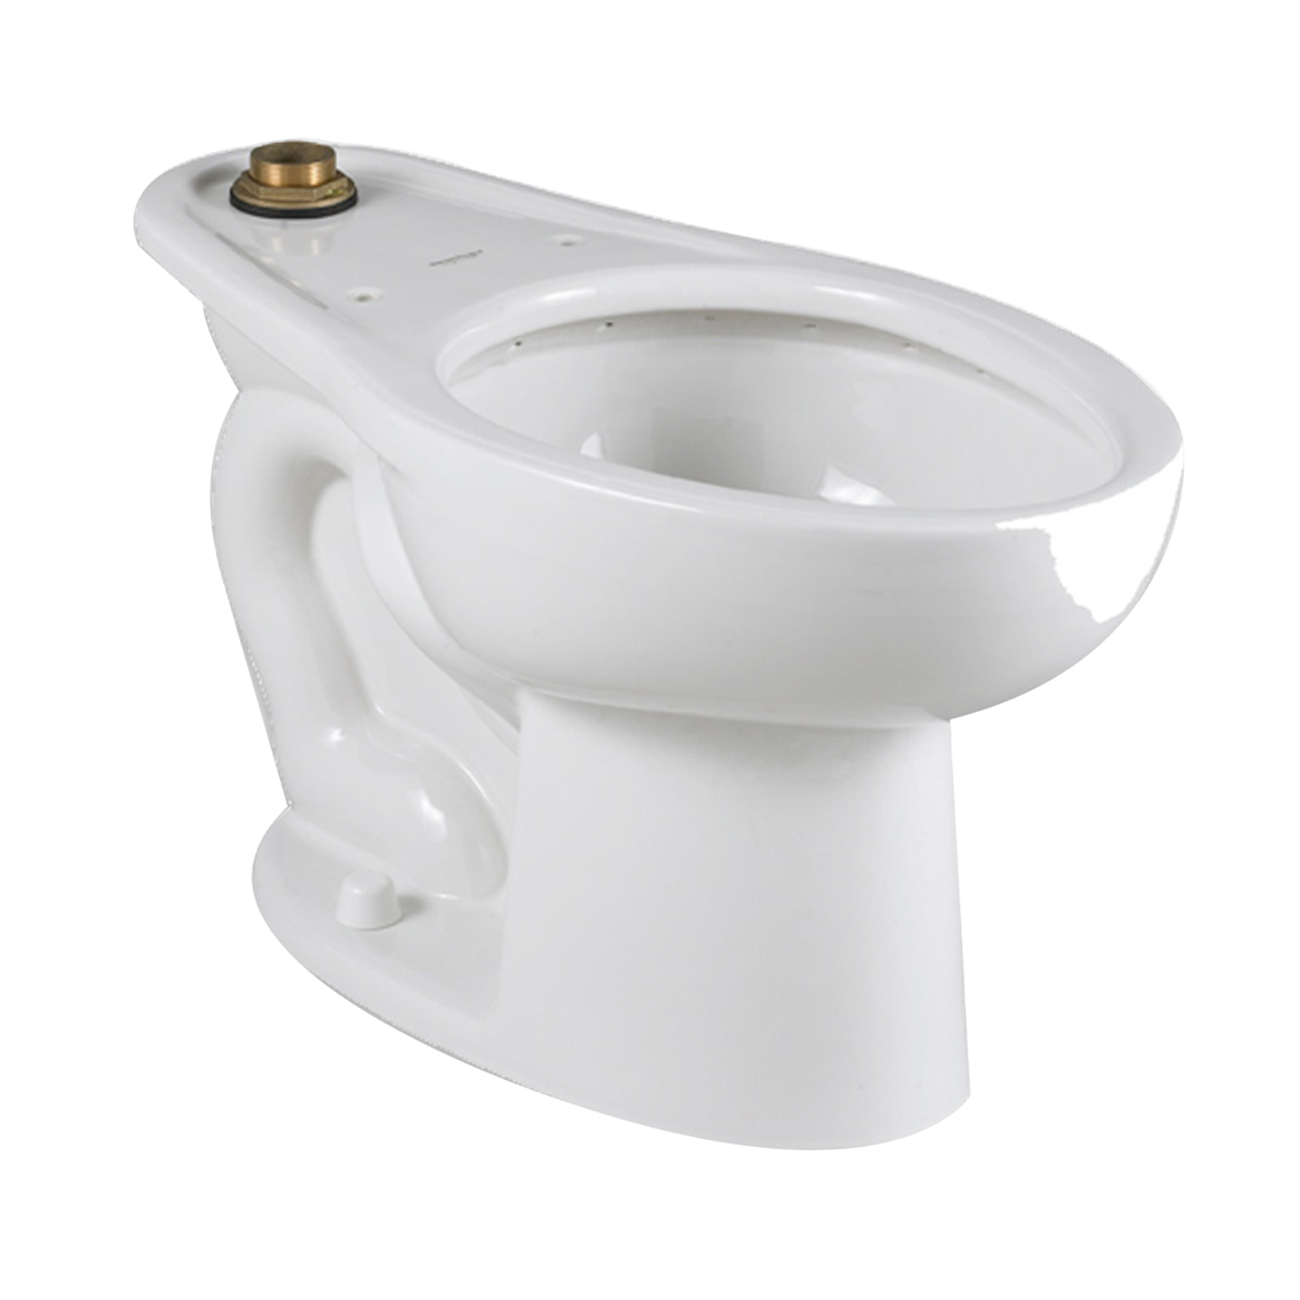 American Standard Madera™ FloWise® 3043.001.020 White Vitreous China Elongated Top Spud Toilet Bowl, 10 in Rough-In, 1.1 - 1.6 gpf